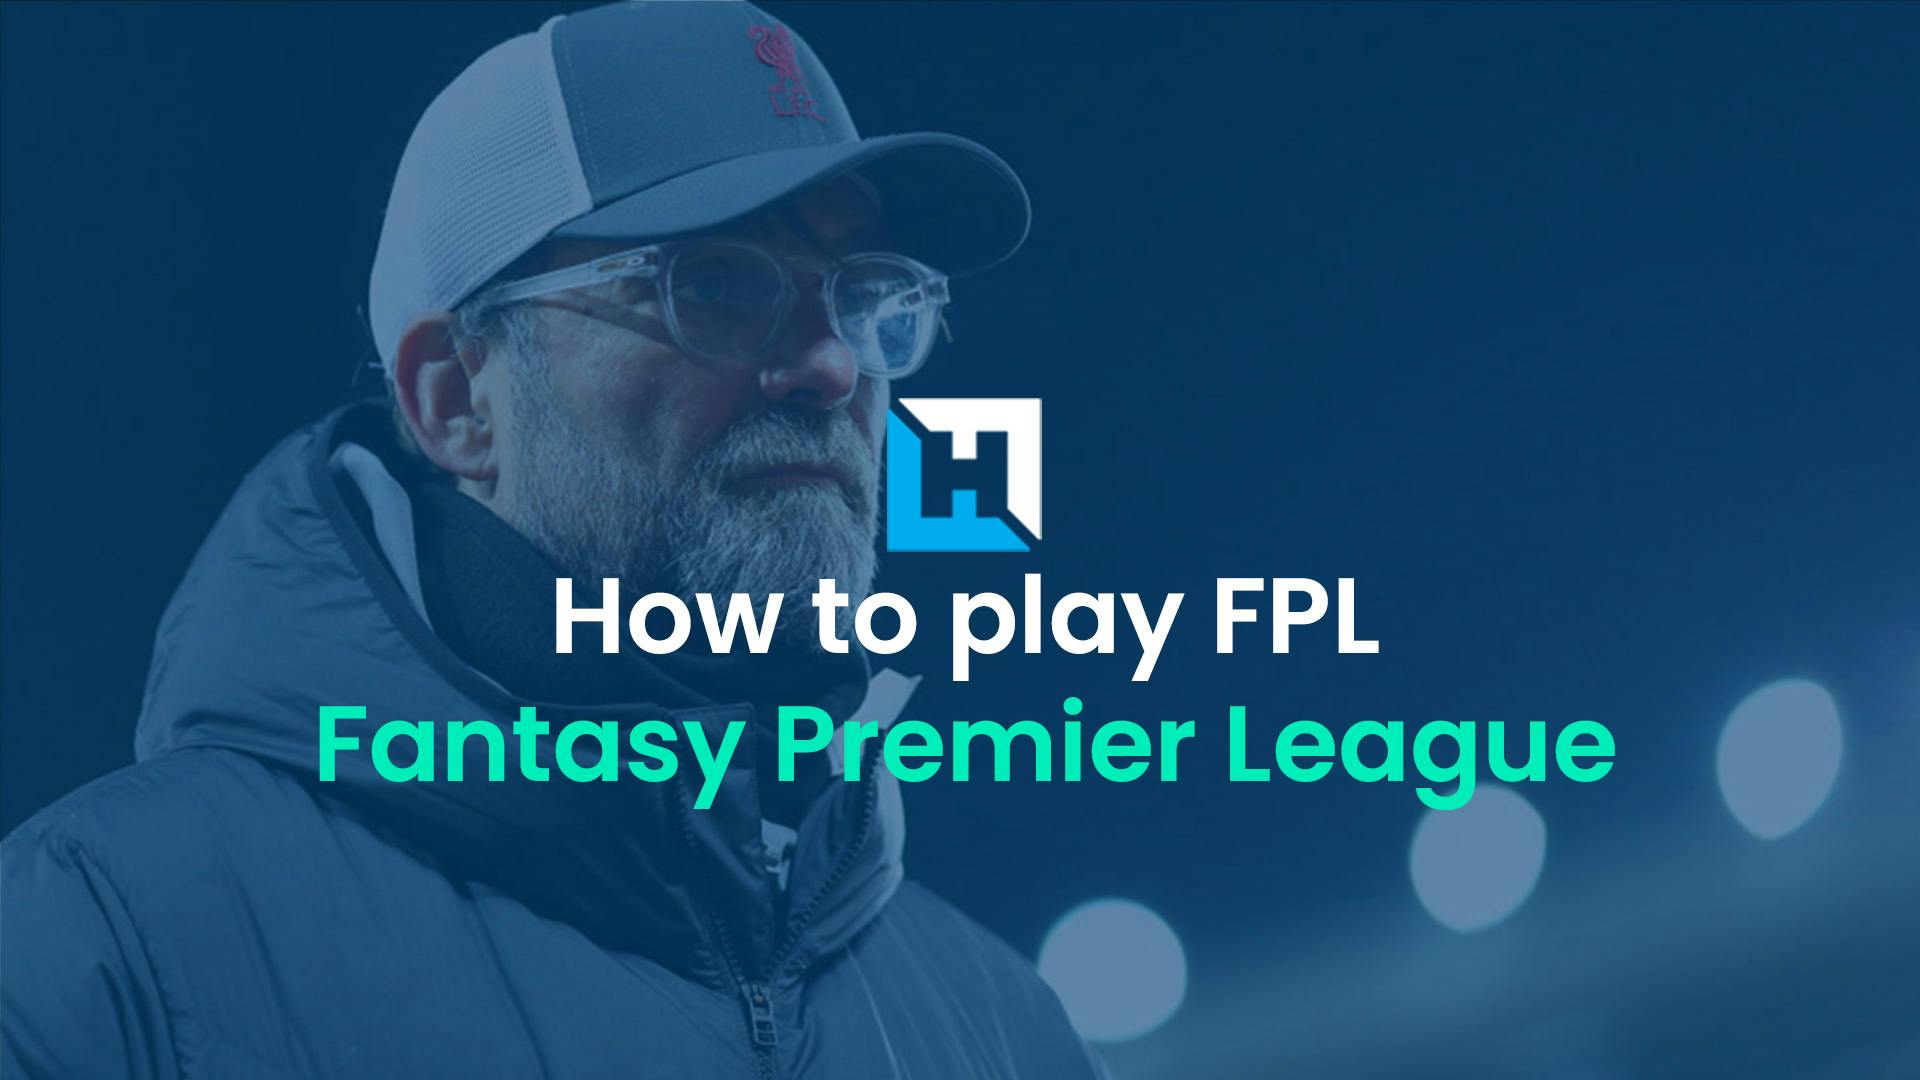 How to play FPL: The complete guide